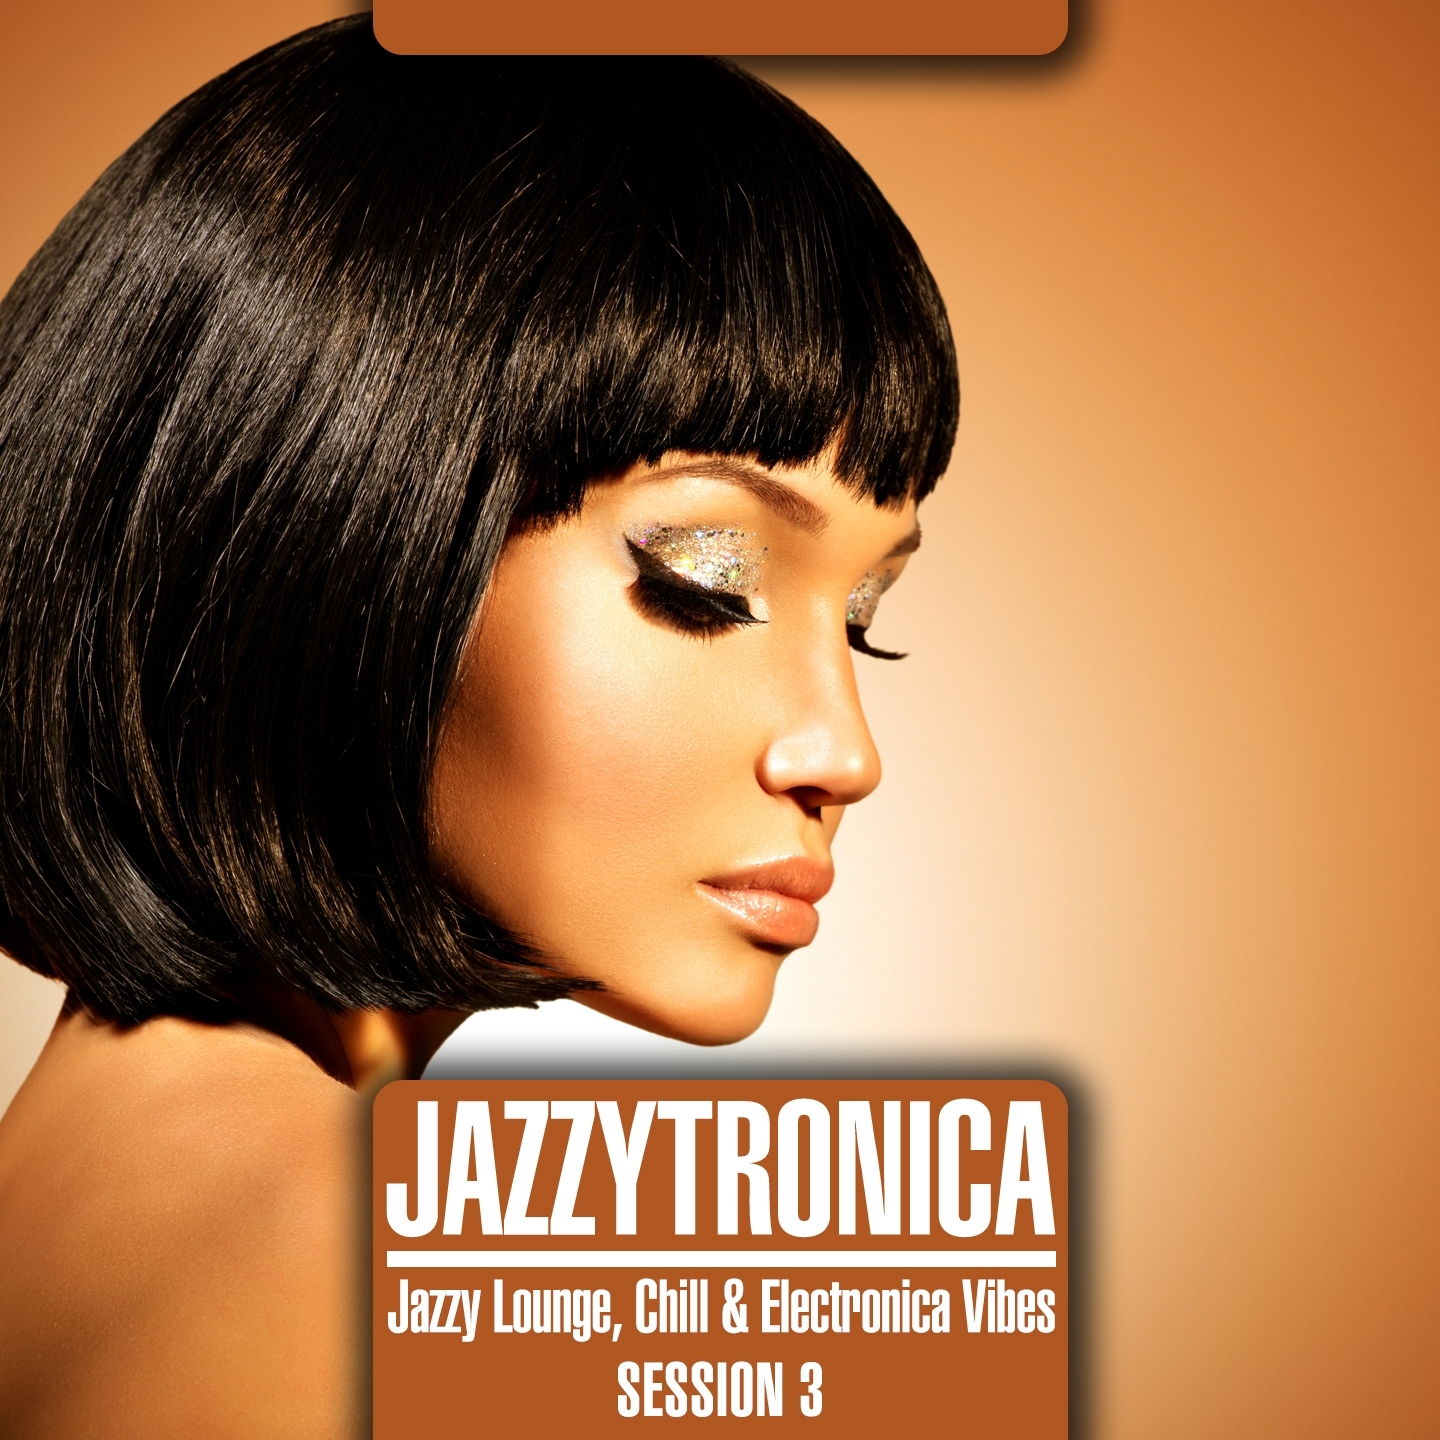 Jazzytronica (Jazzy Lounge, Chill & Electronica Vibes) Session 3